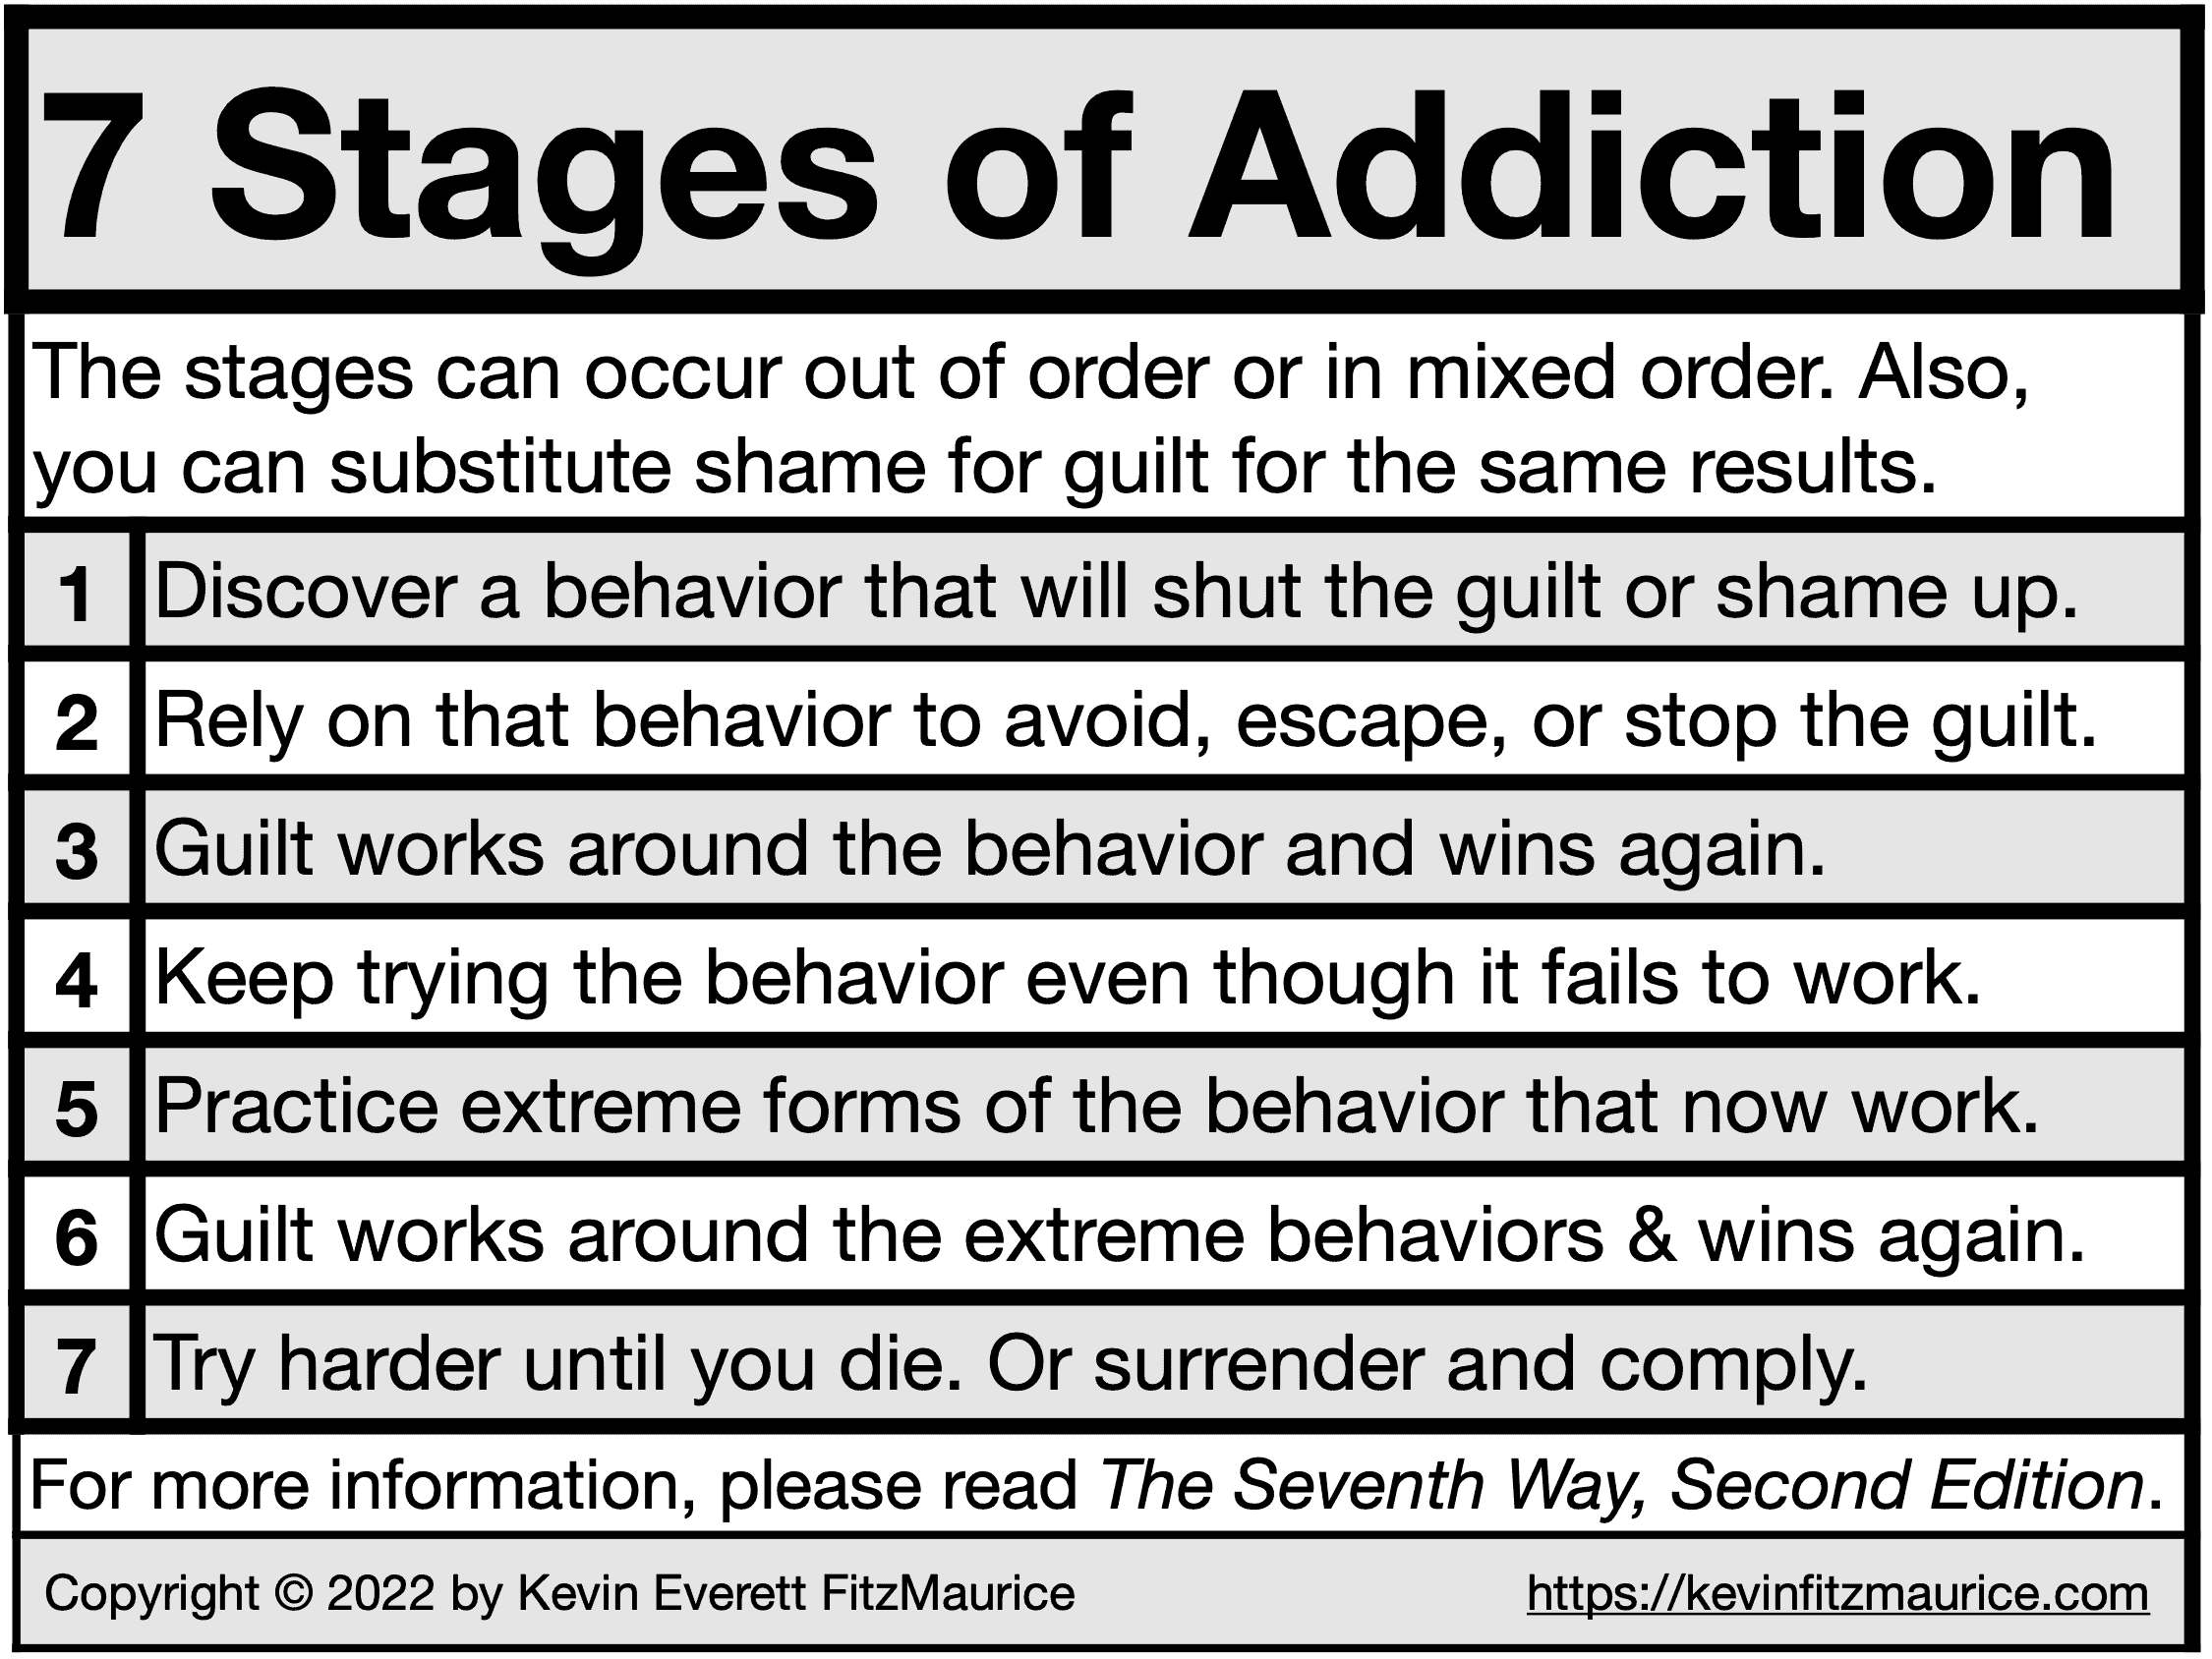 7 Stages of Addiction